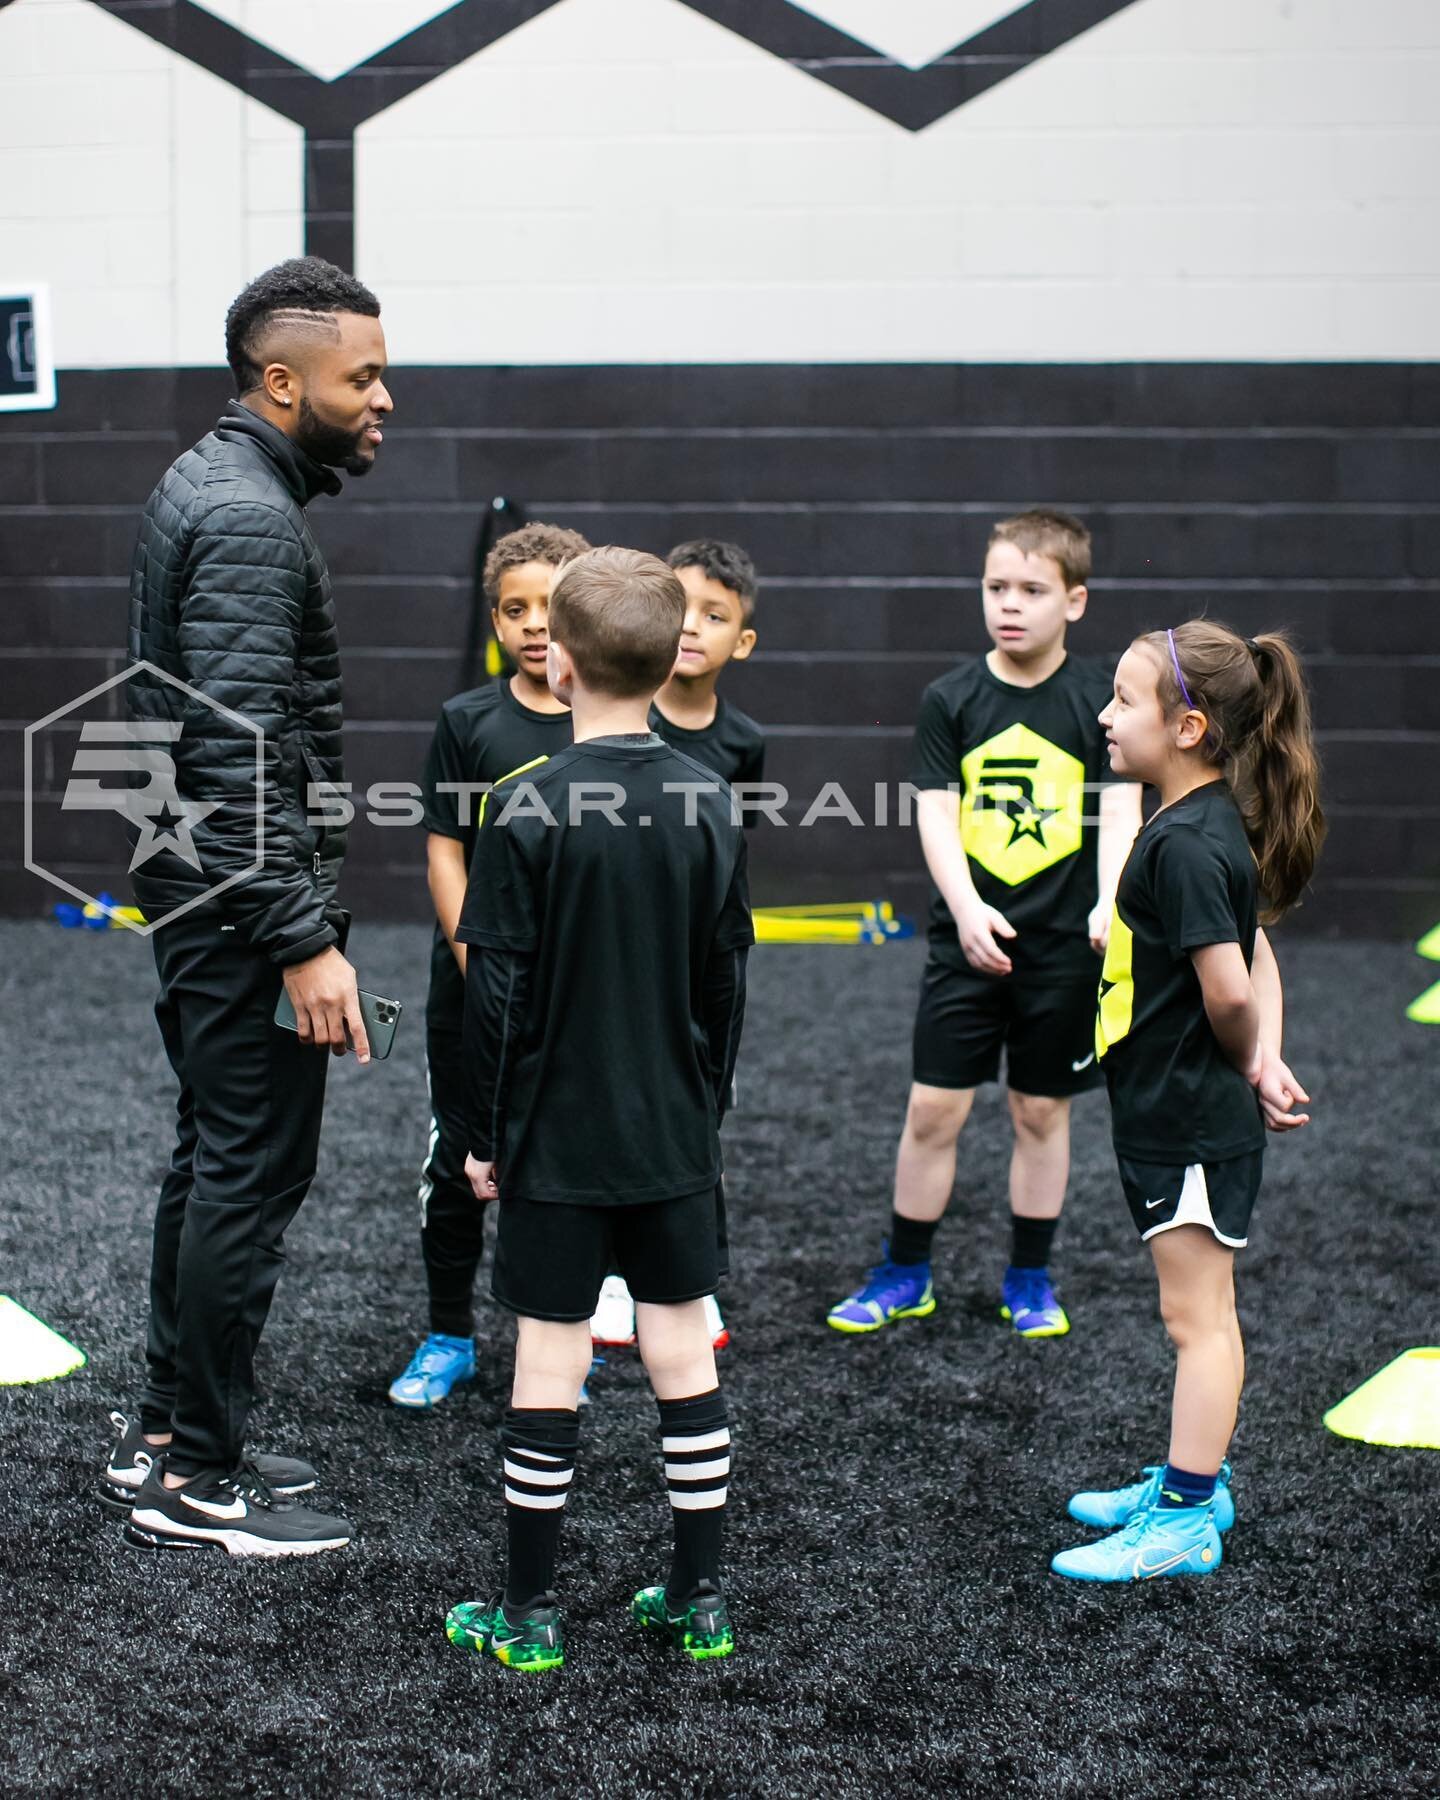 AT 5 Star Training Center, our Lil&rsquo; Stars program is designed for soccer players ages 6-10. Our primary focus is building a base of solid technical skills combined with proper technique and application.
.
$250 for 10 sessions (good for 6 mo)
$4